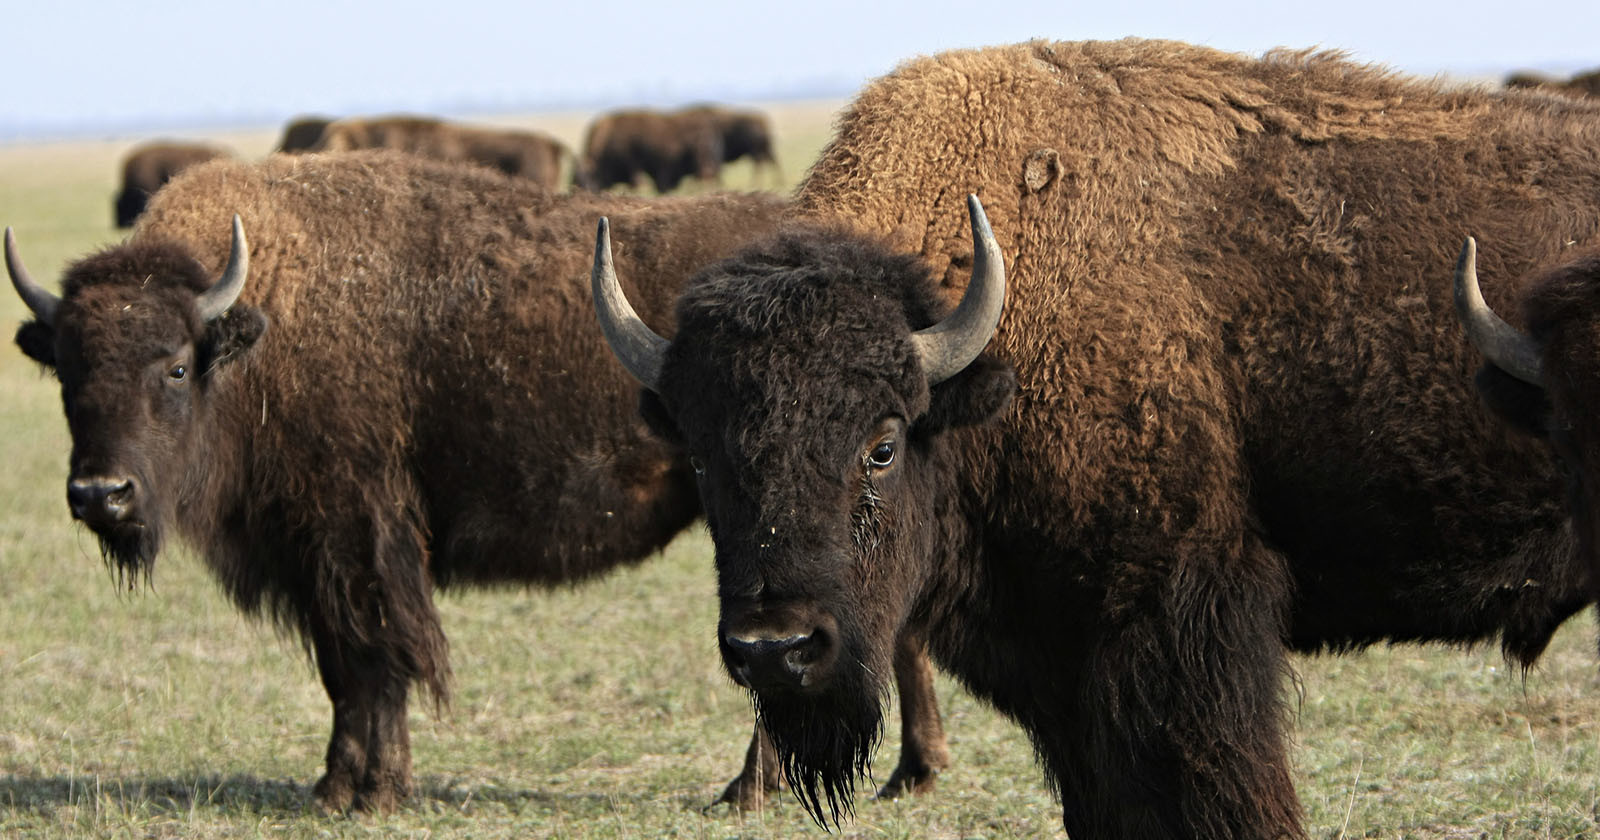  photographer charged buffalo after getting too close 